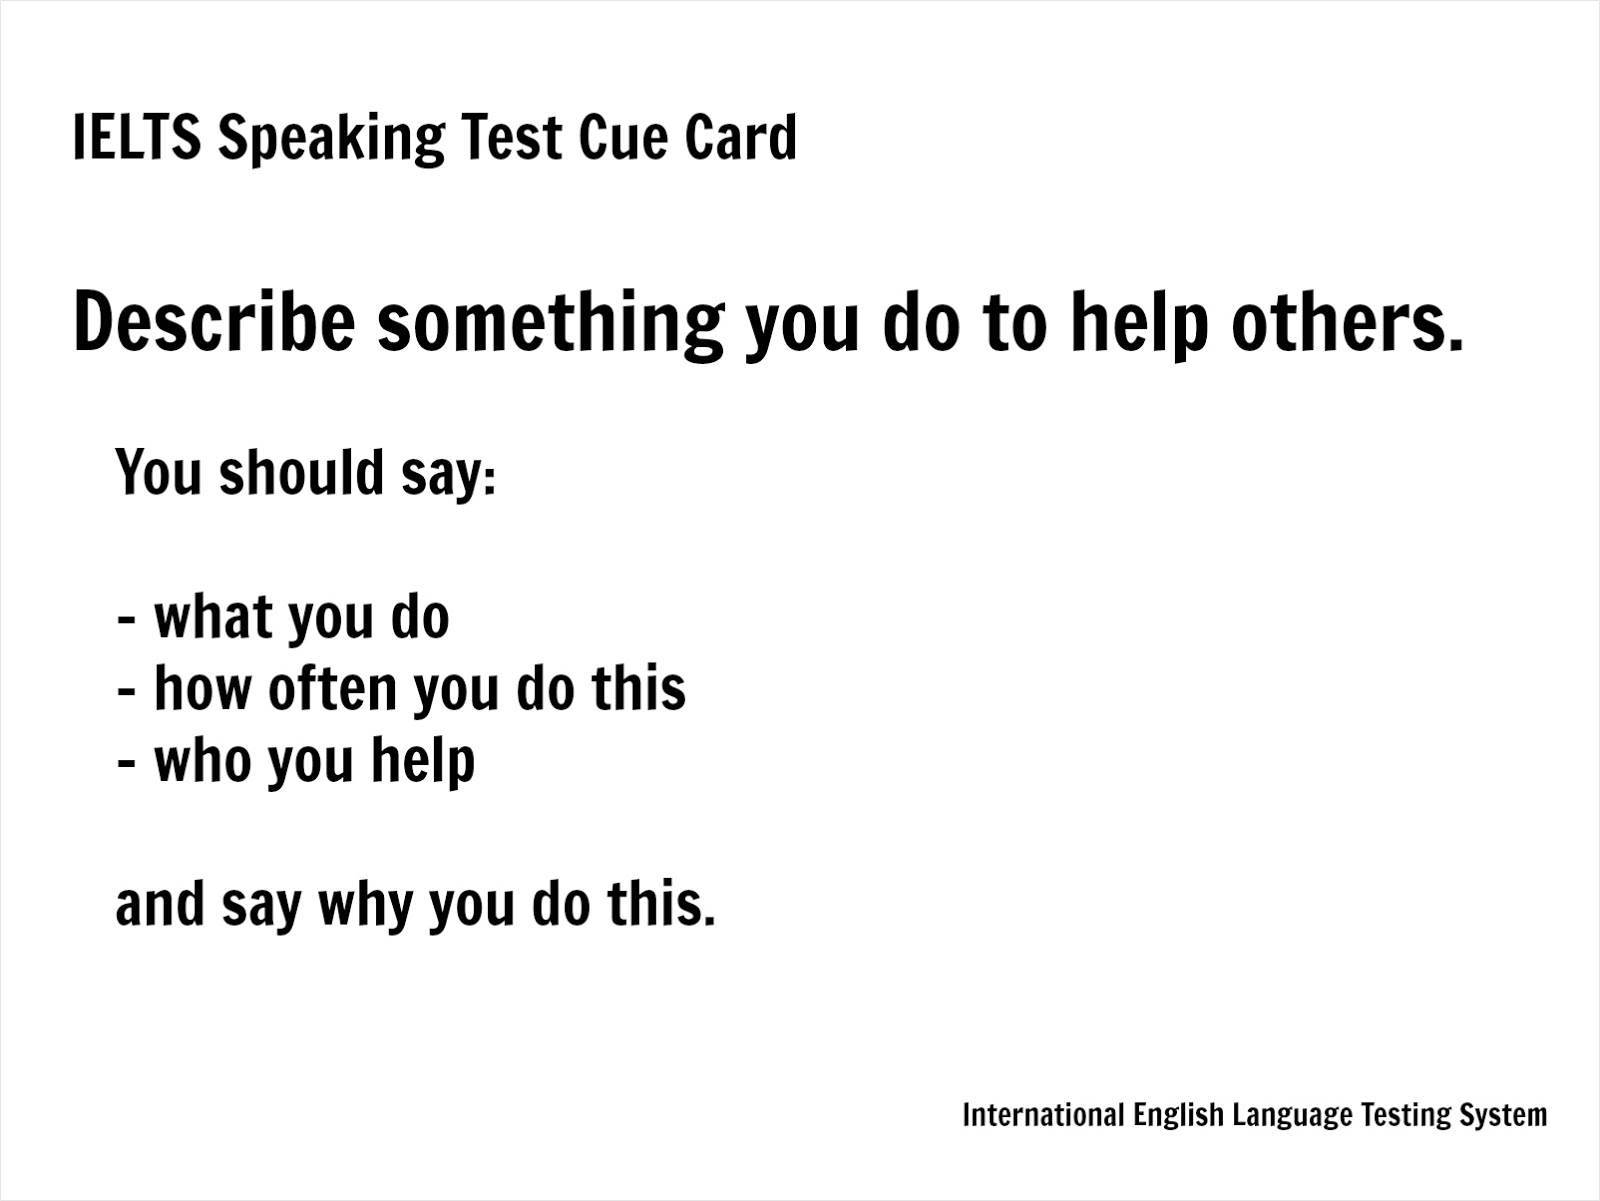 Describe something you do to help others | IELTS Speaking ...